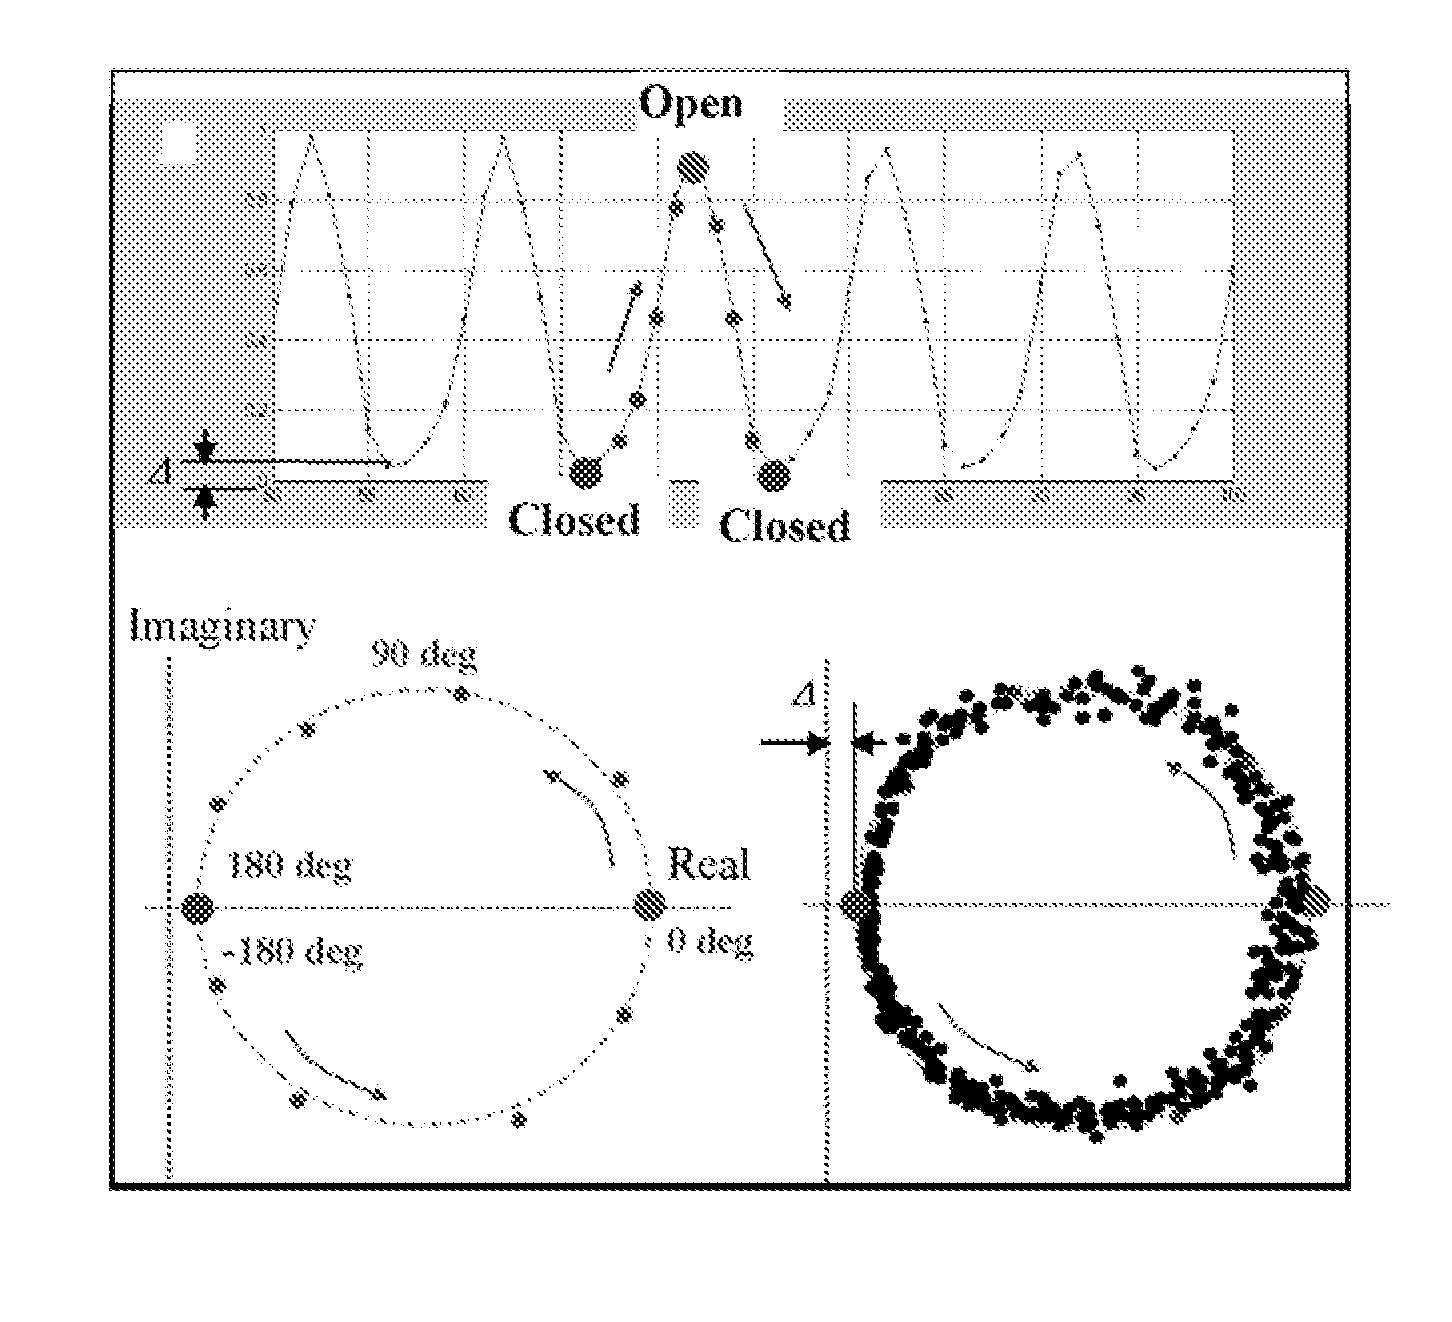 System and method of analyzing voice via visual and acoustic data